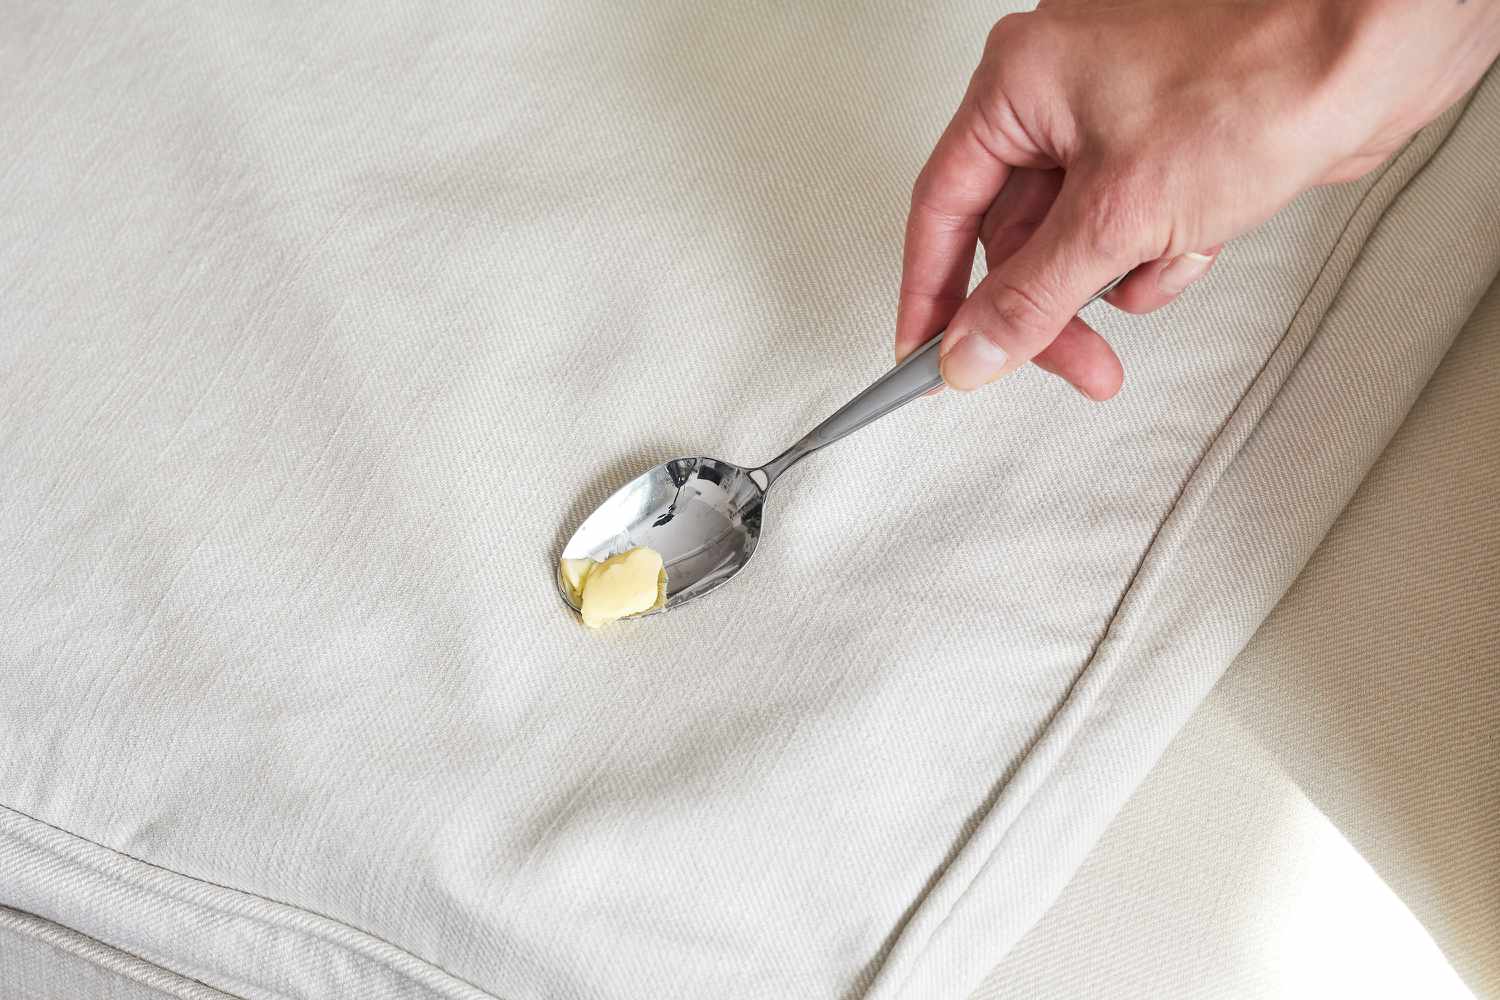 Removing butter solids with a spoon